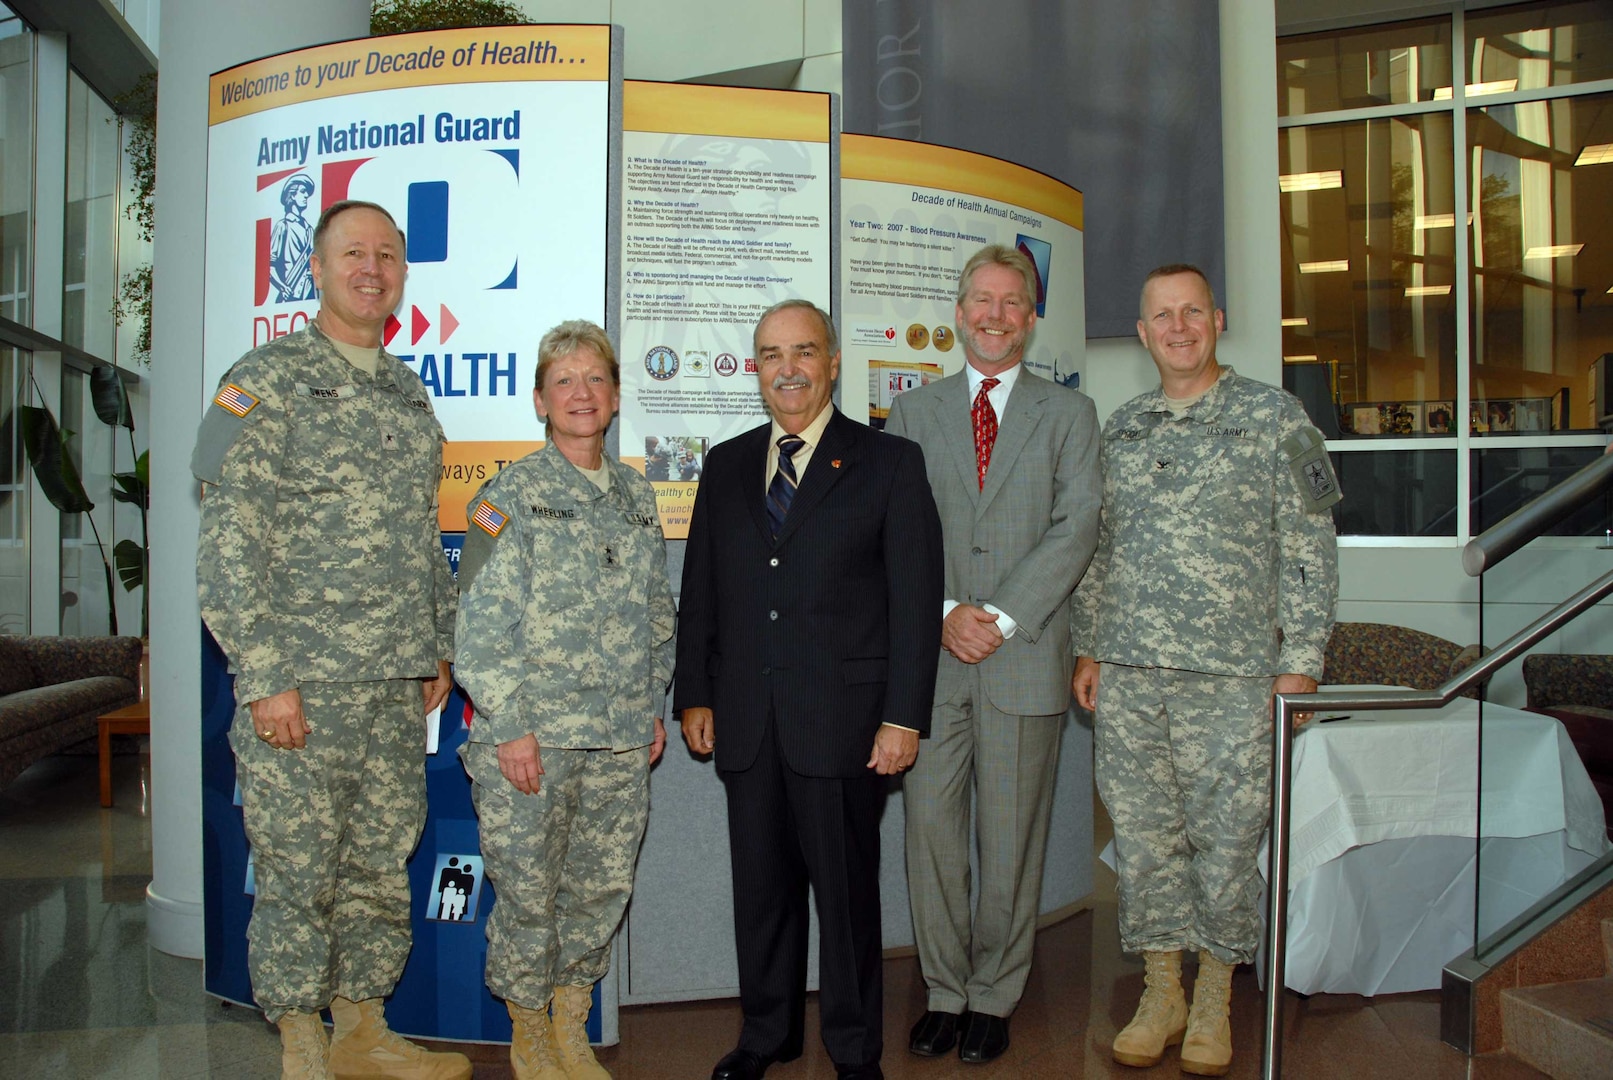 From left, Brig. Gen. Darren Owens, special assistant to the director, Army National Guard; Maj. Gen. Deborah Wheeling, deputy surgeon general for the Army National Guard; Lawrence Sadwin, past chairman of the American Heart Association; David Markiewicz, executive director of the American Heart Association, Mid-Atlantic; and Col. David Sproat, the Army Guard's chief surgeon, gather to highlight the Army Guard Readiness Center's efforts to become a Start! Fit Friendly worksite. Start! encourages employers to cultivate an environment of physical activity and health through walking. The initiative expands the Army National Guard's Decade of Health Program, a 10-year outreach campaign that promotes a healthy military force, "Always Ready, Always There...Always Healthy."